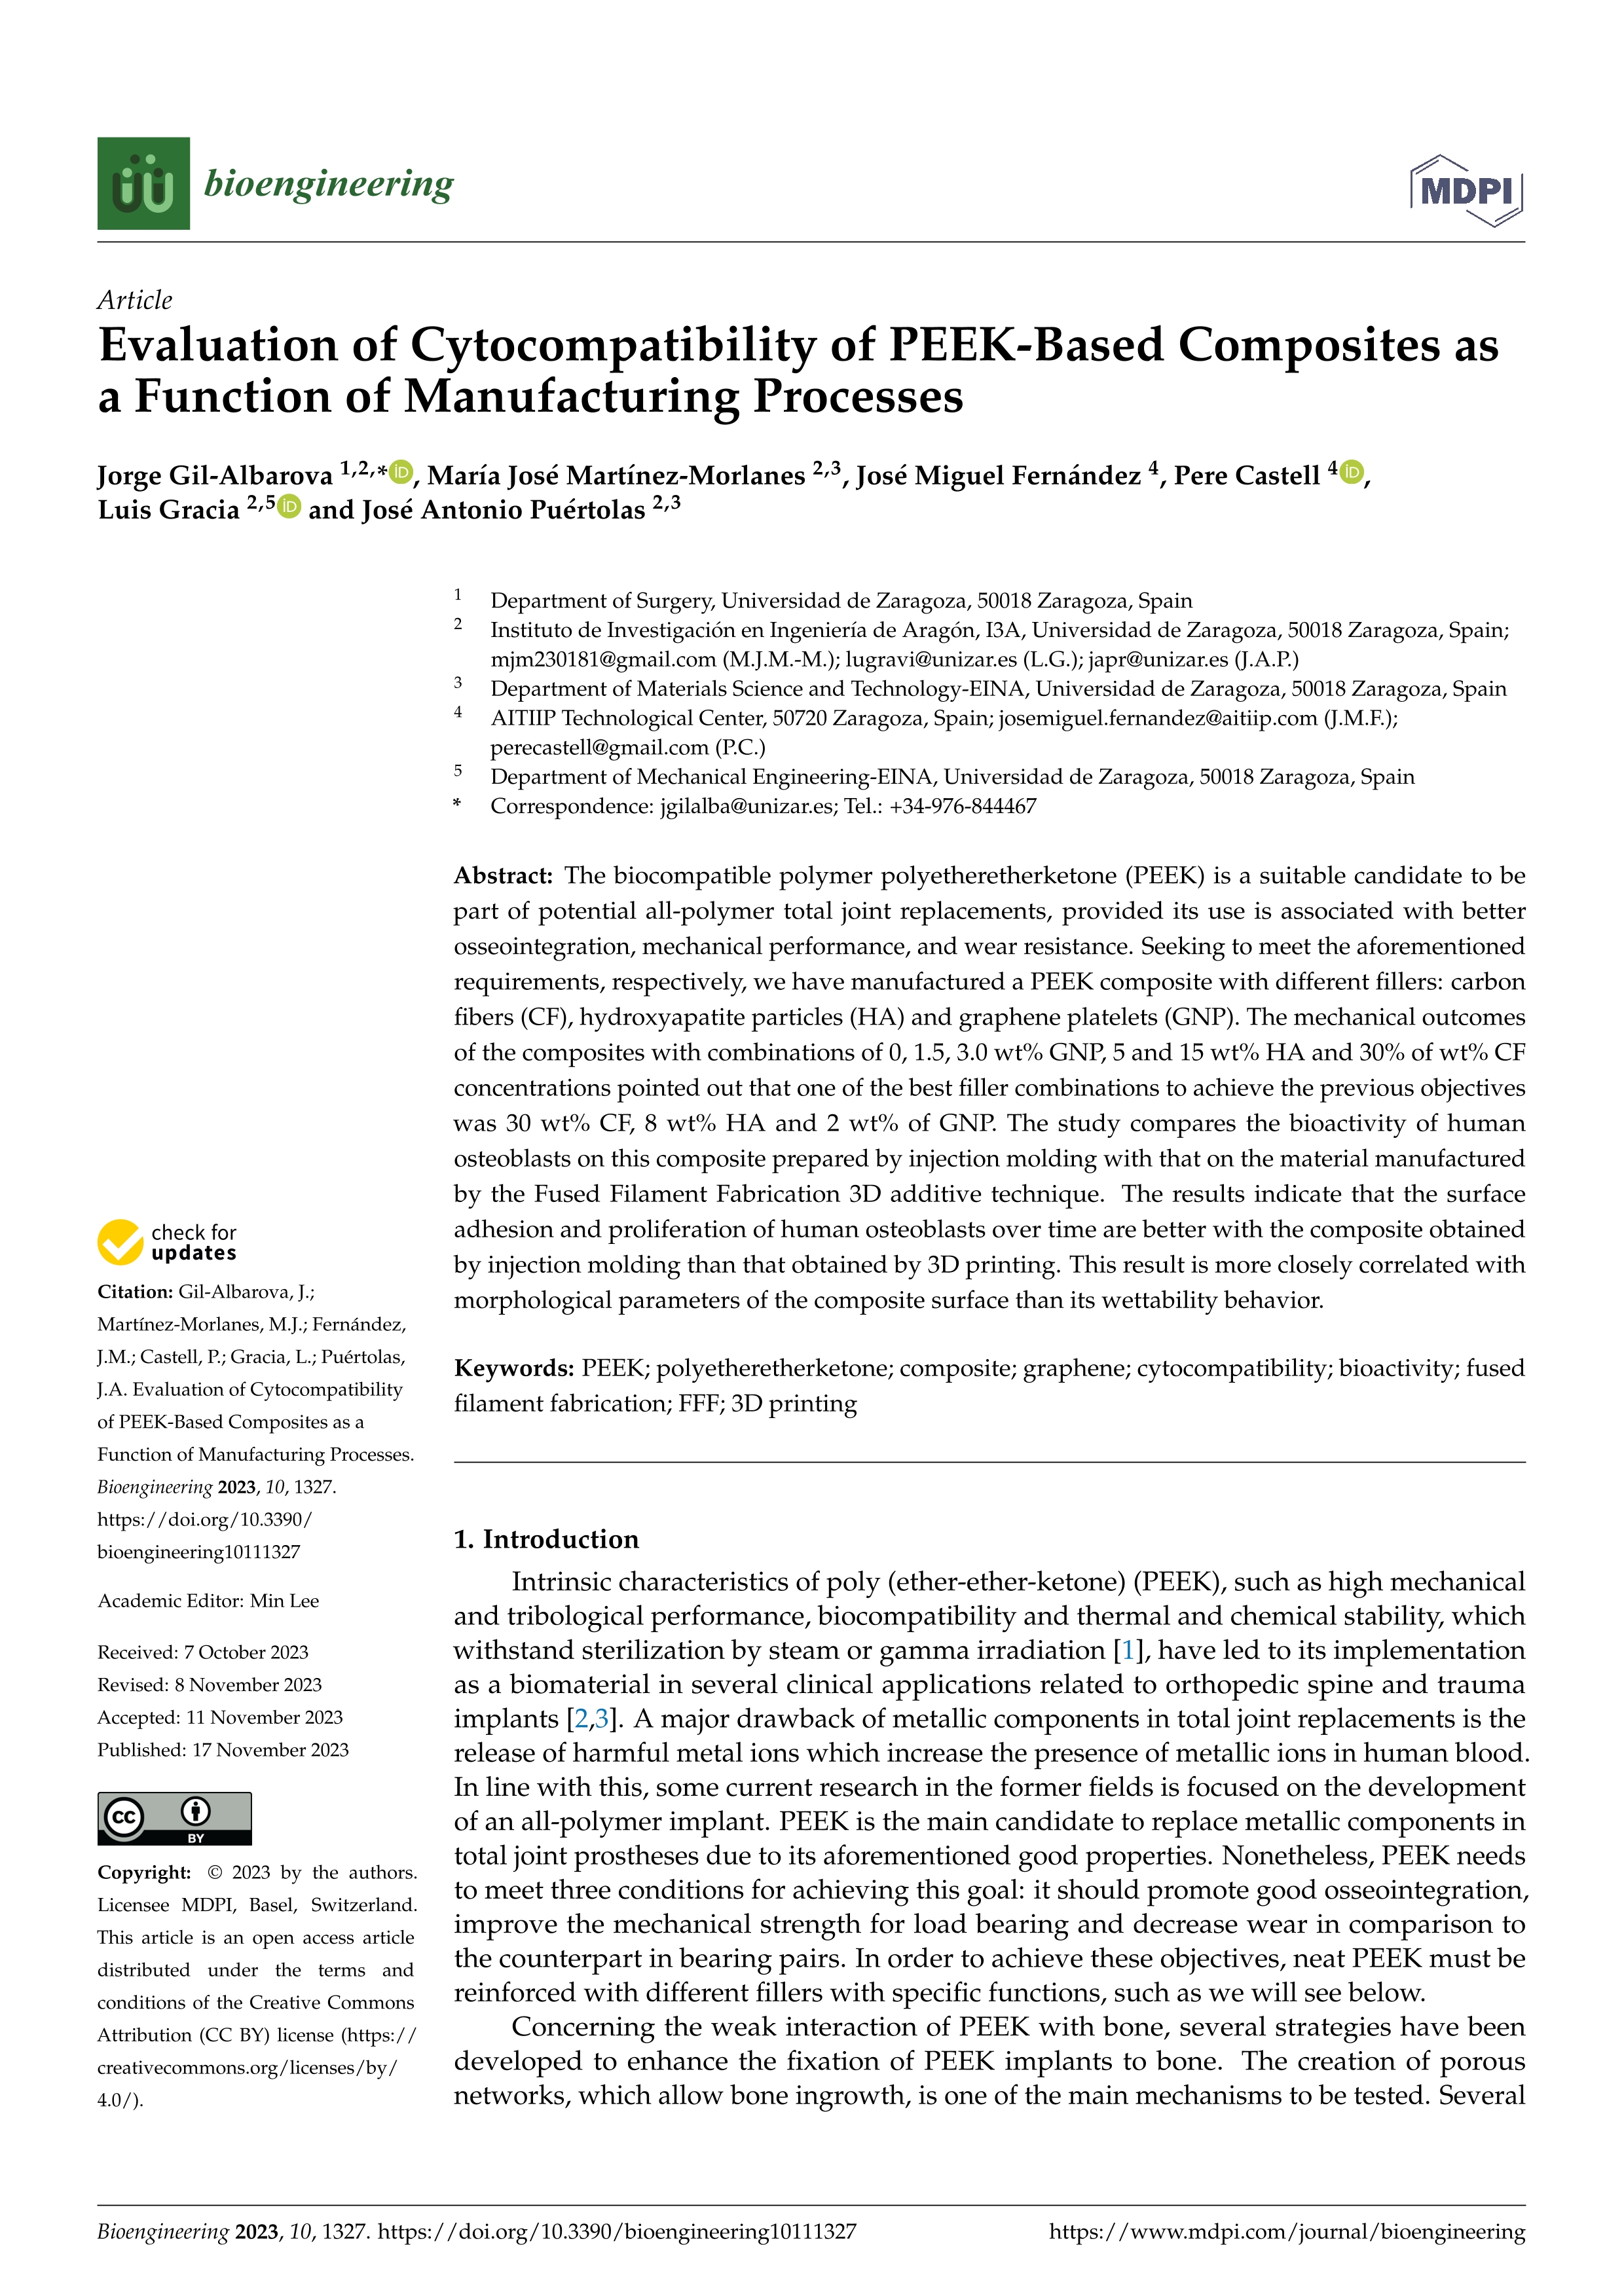 Evaluation of Cytocompatibility of PEEK-Based Composites as a Function of Manufacturing Processes